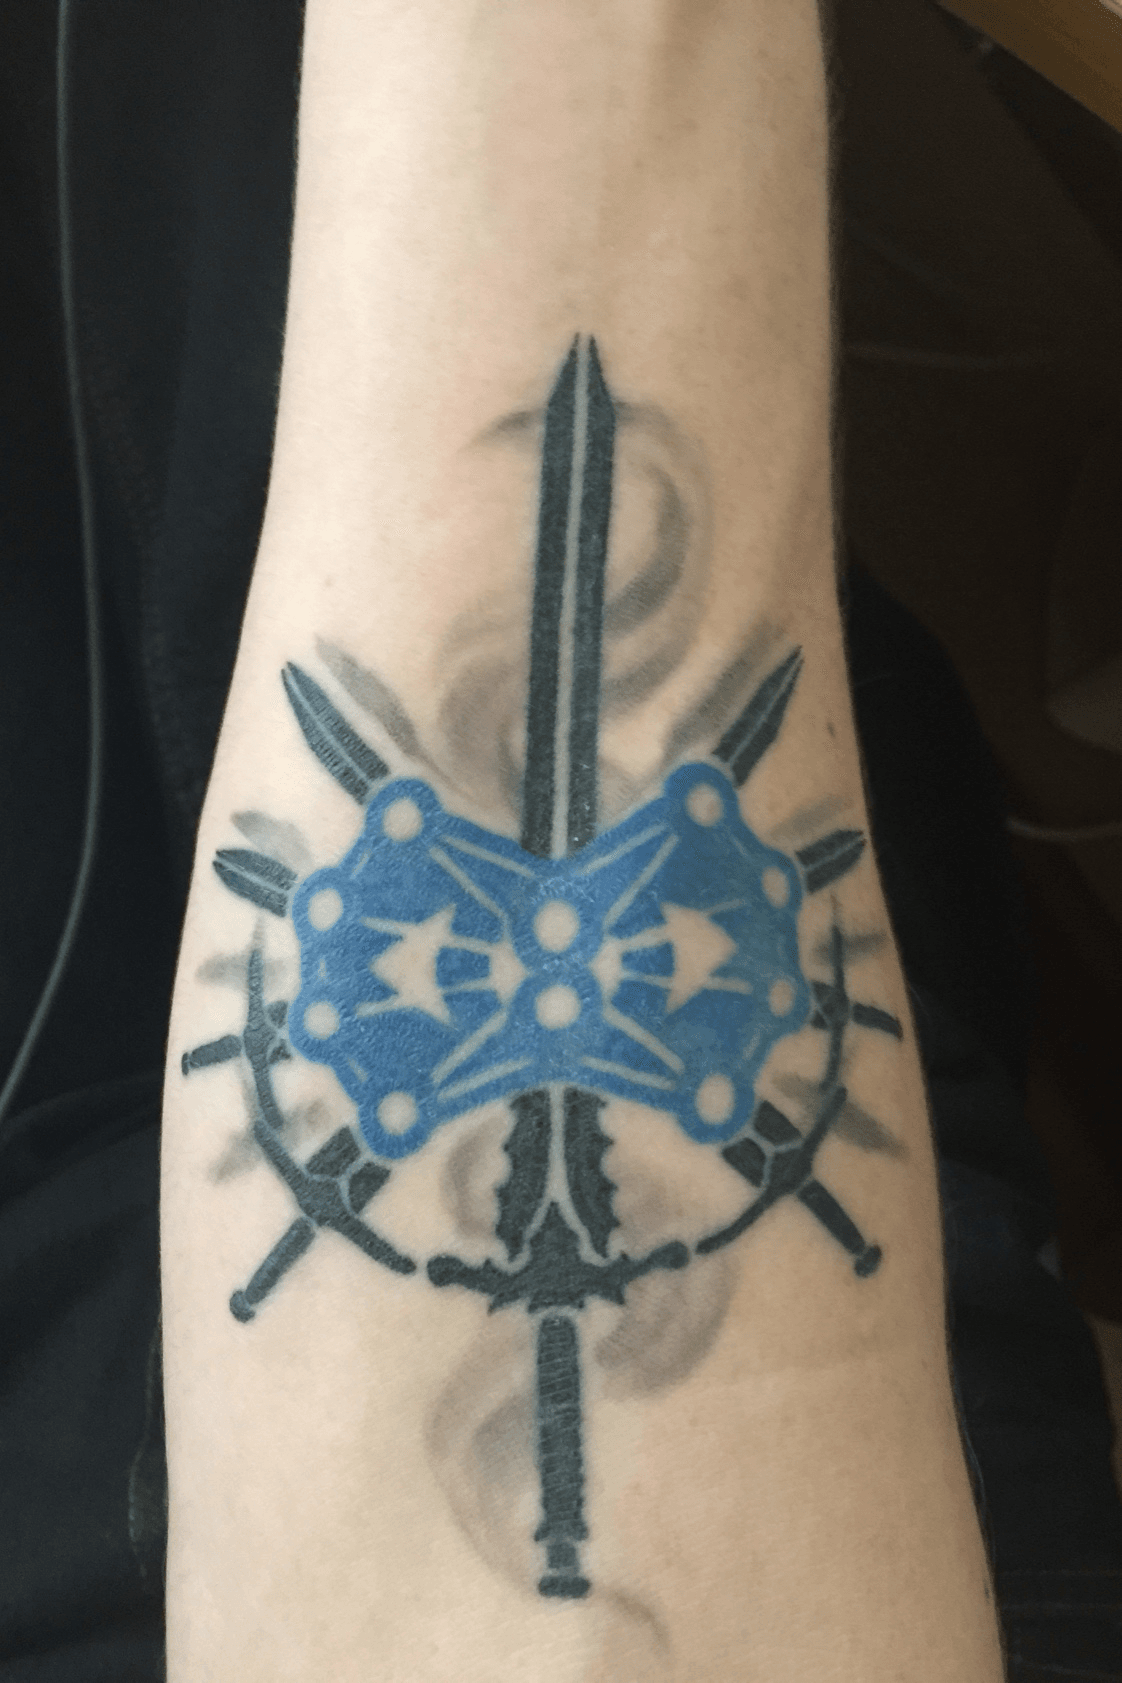 My Stormlight Archive and Mistborn tattoo  rCosmere